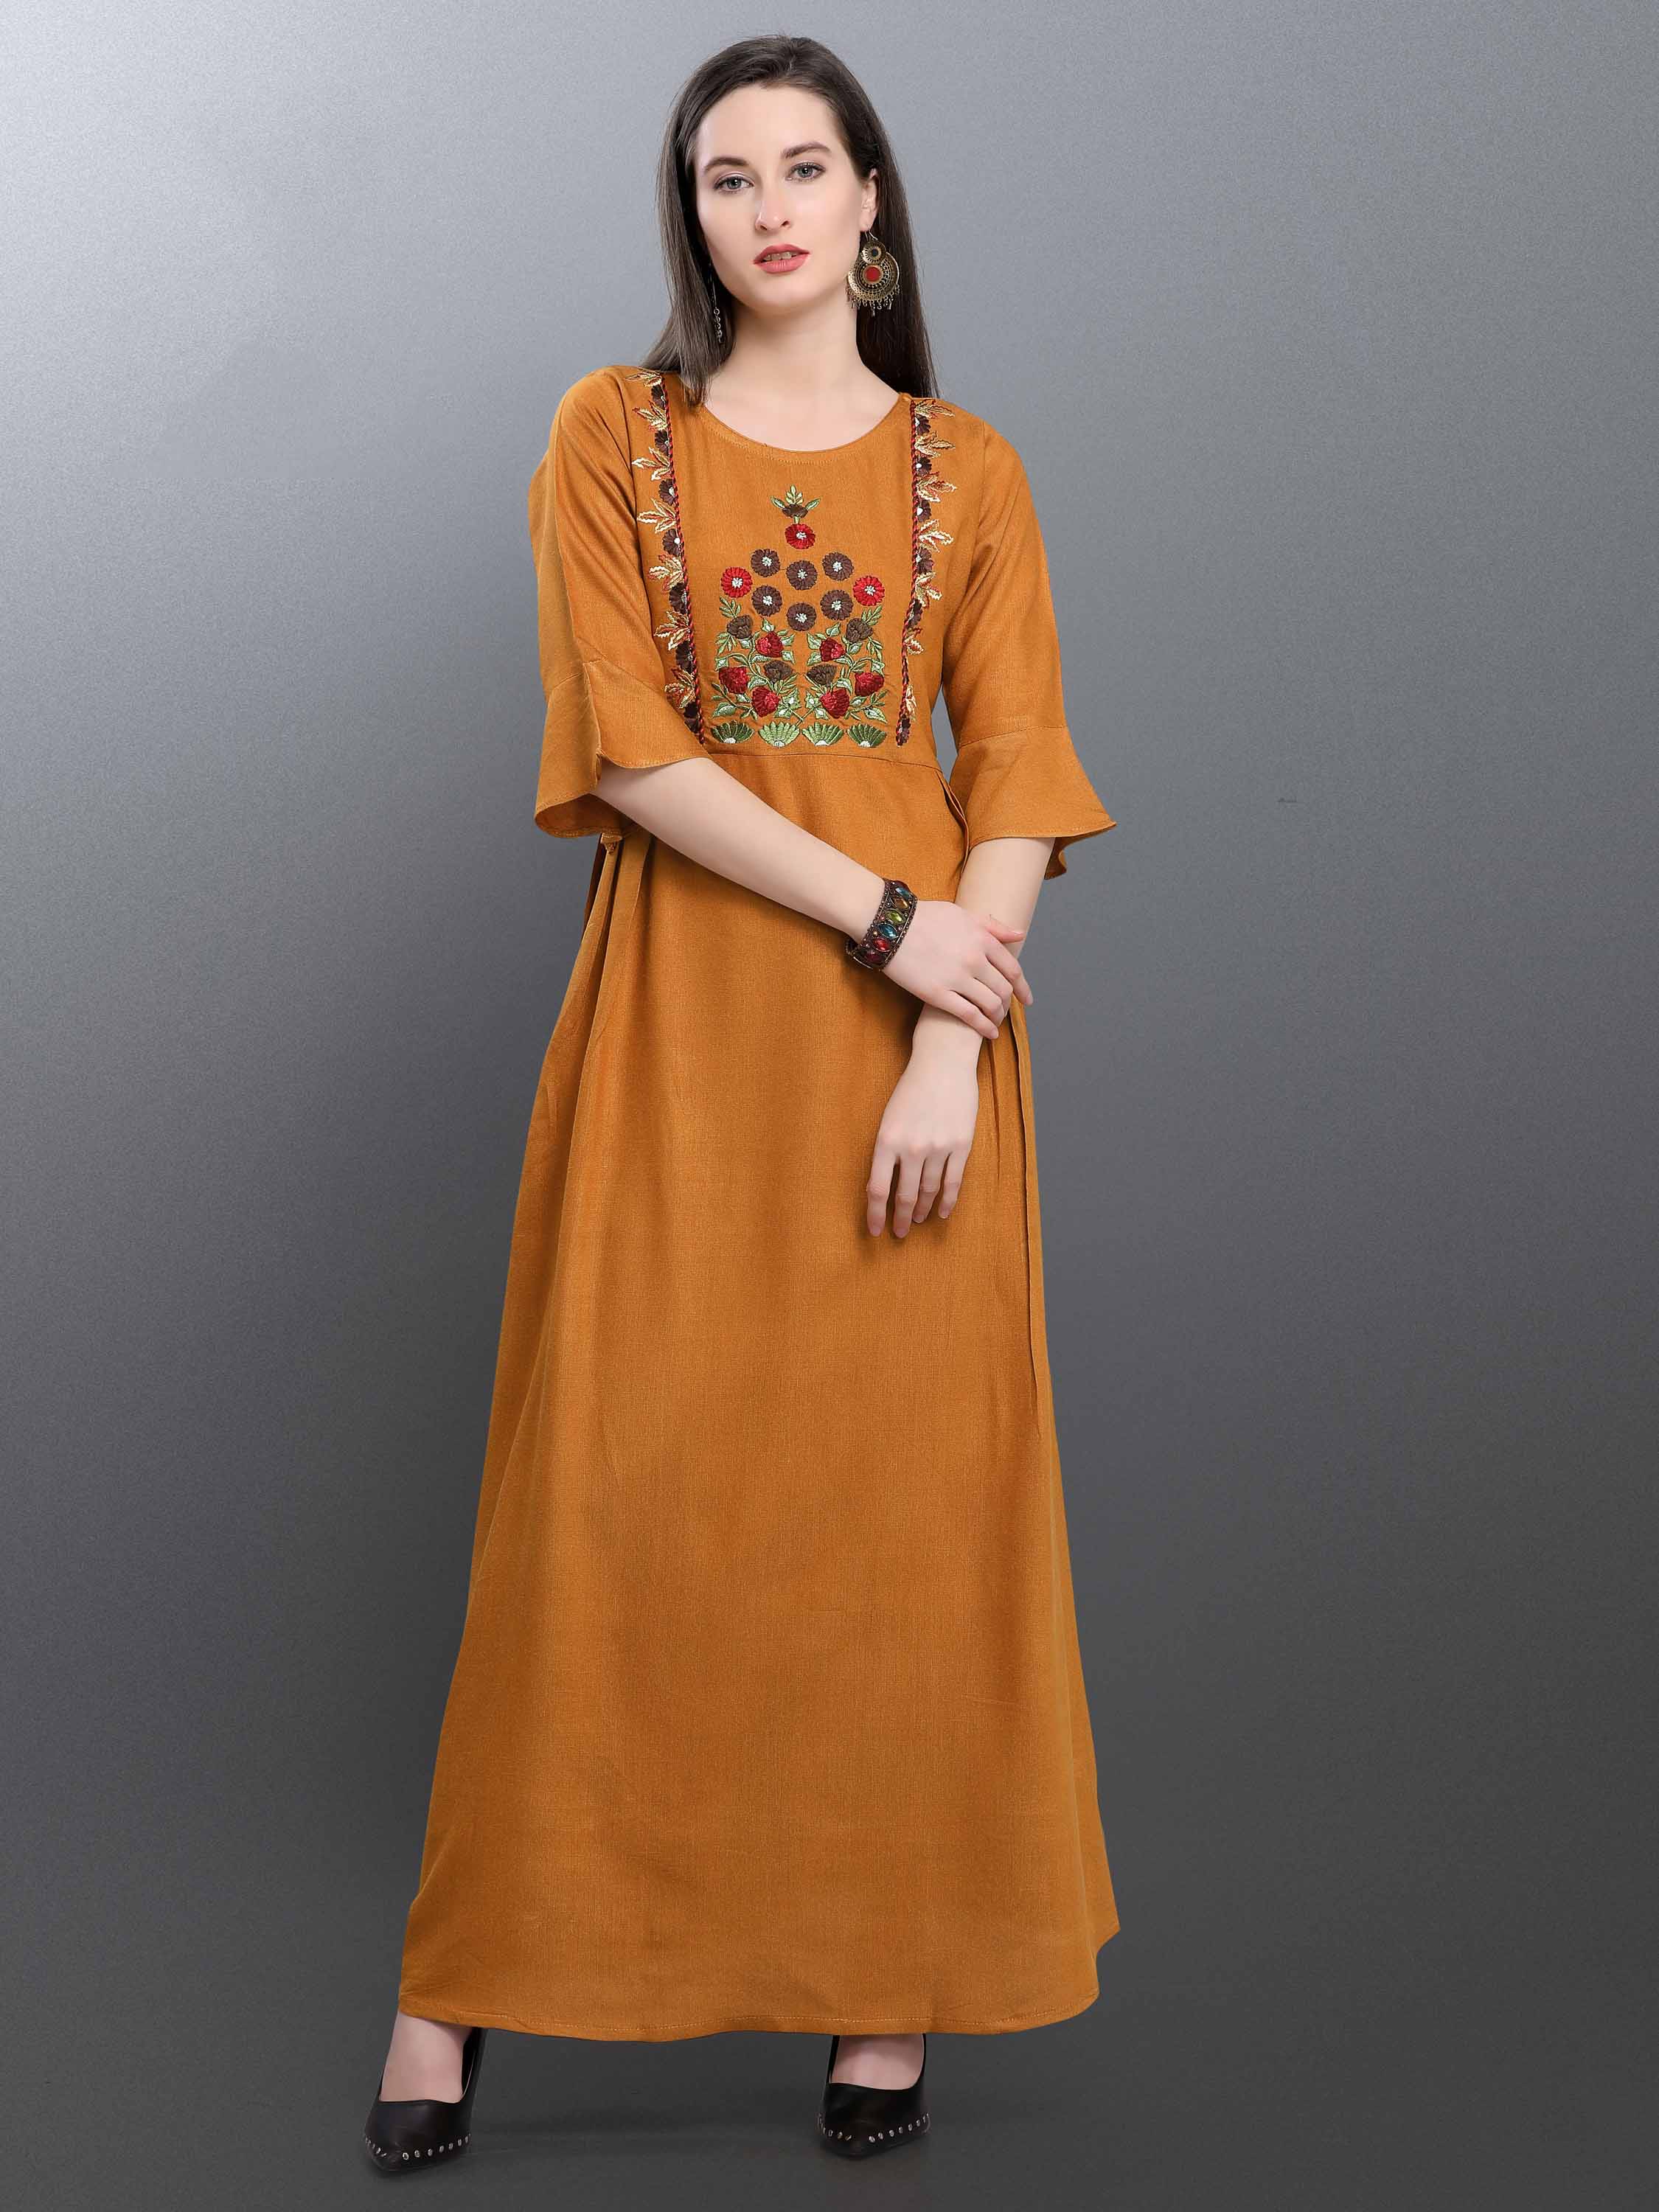 Designer Readymade Long Kurti In Musturd Yellow Color Fabricated On ...